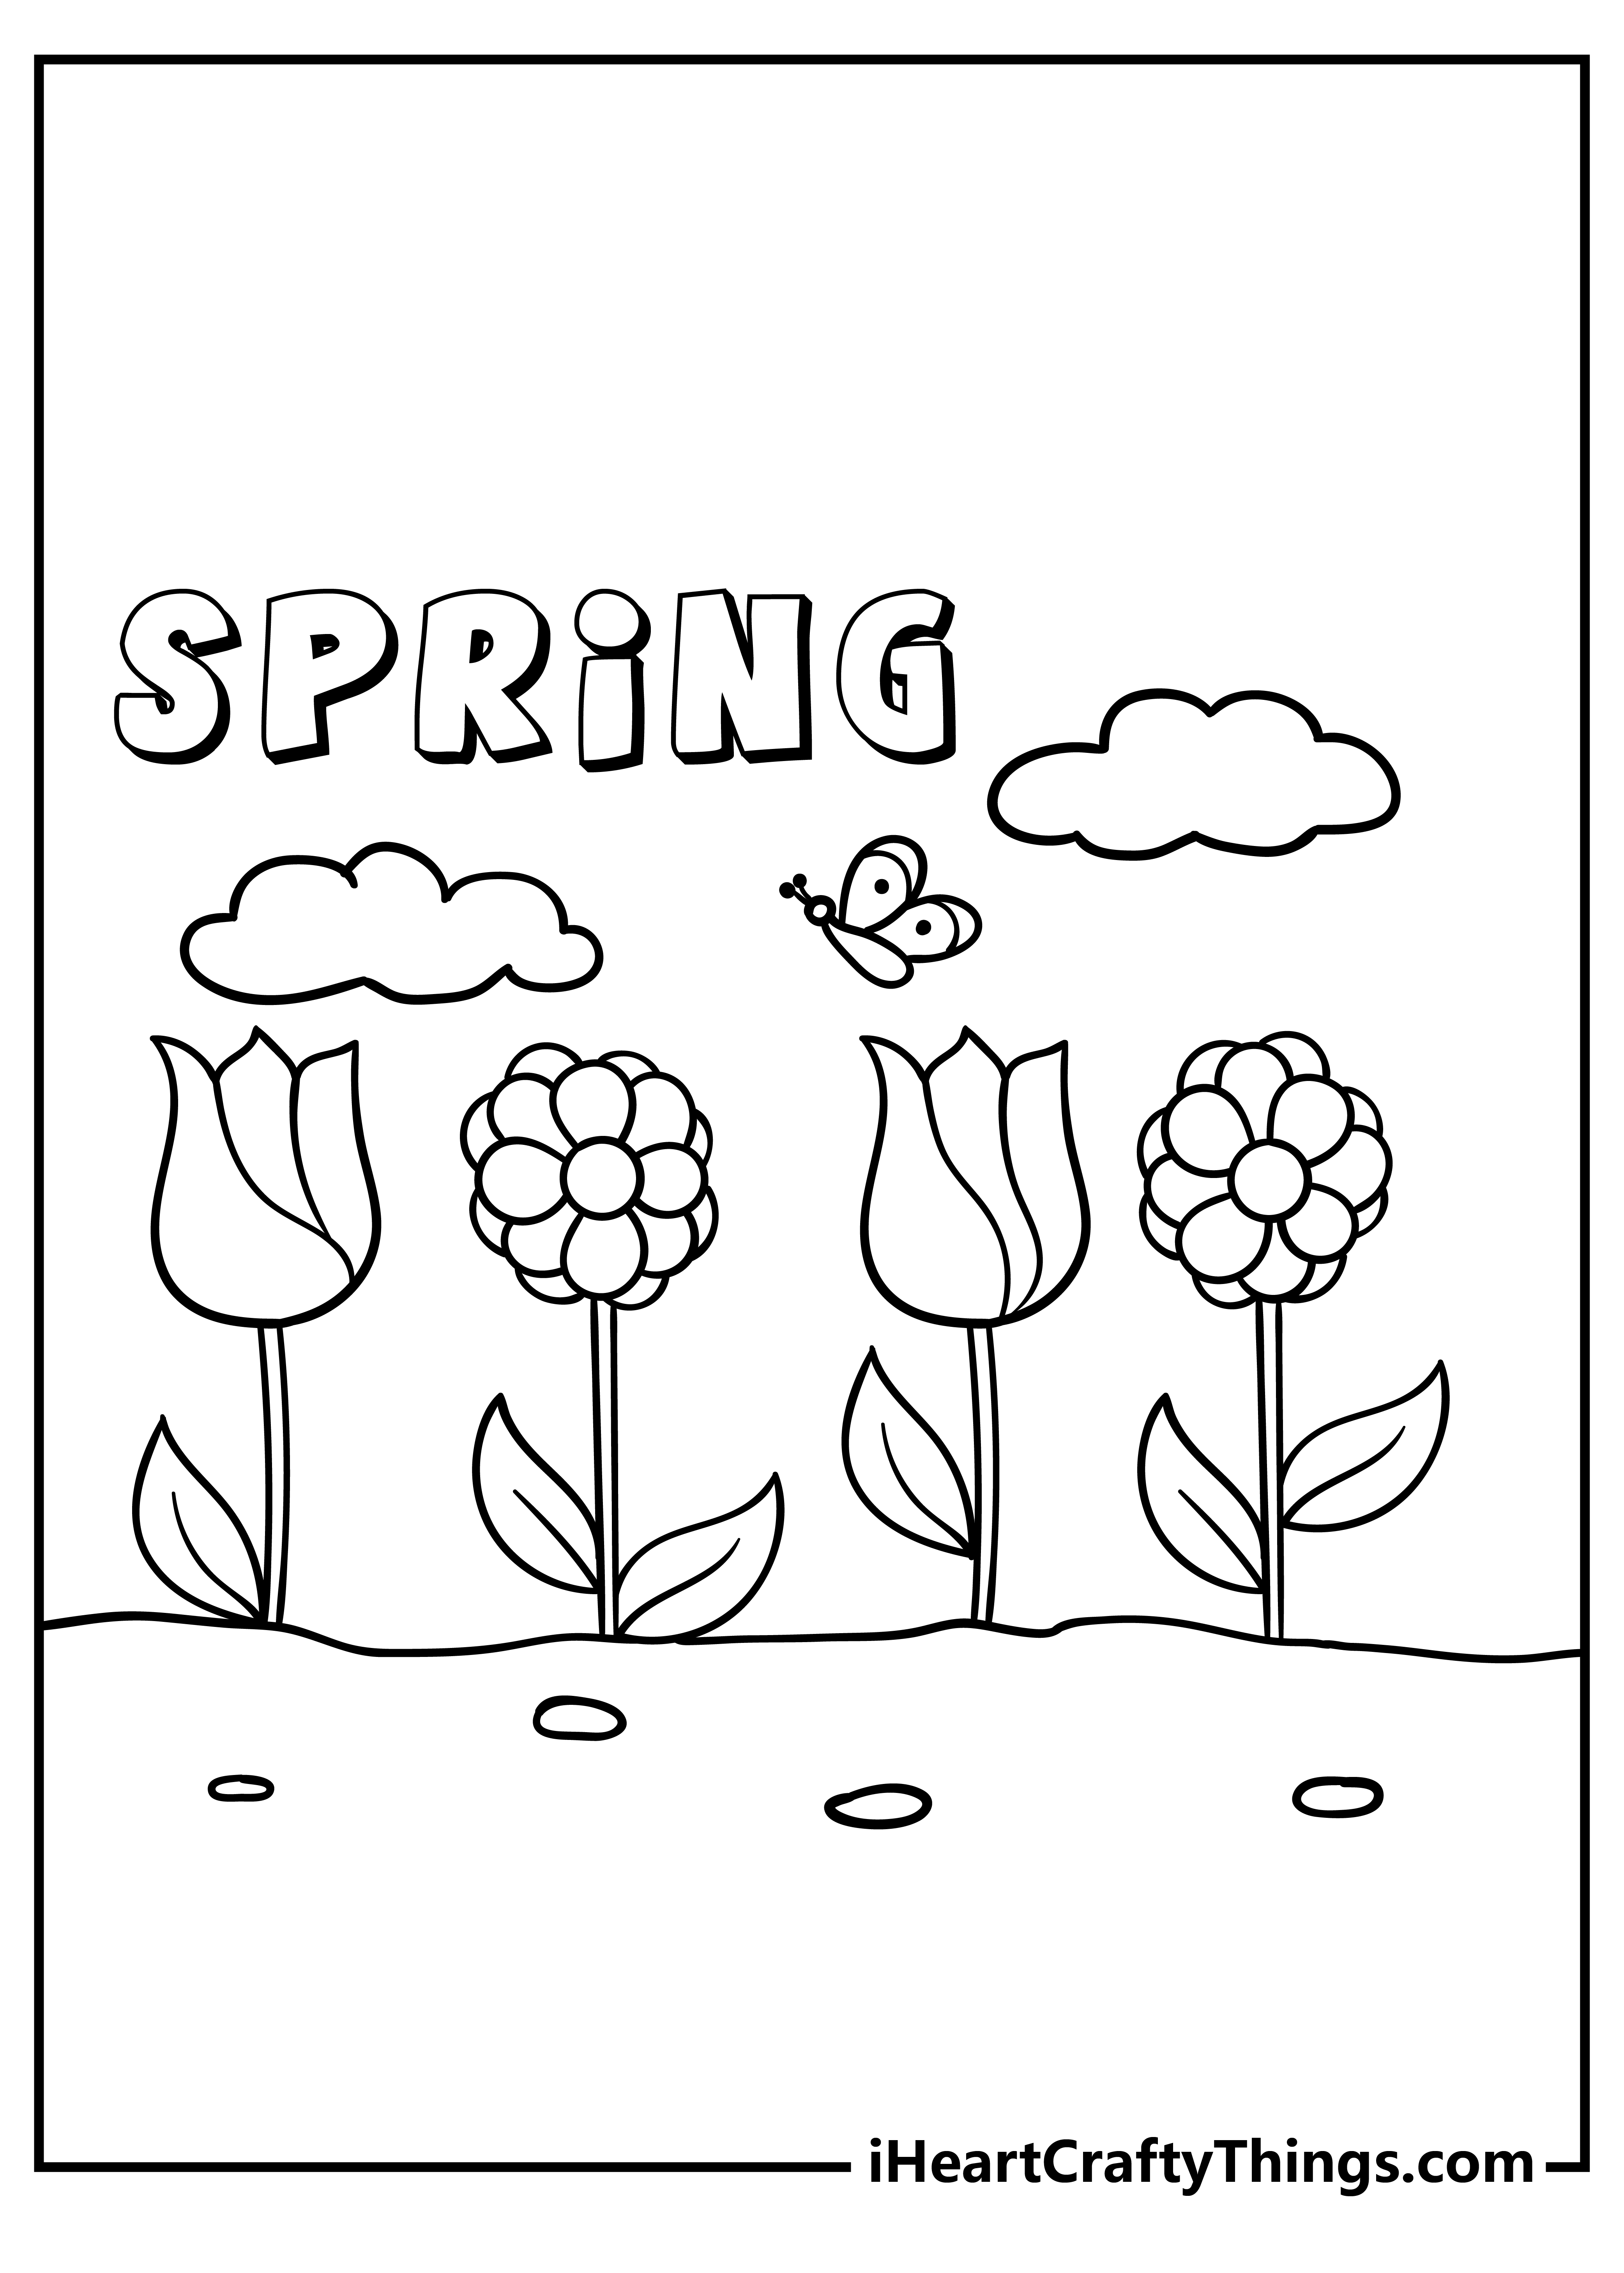 Spring Coloring Pages for kids free download